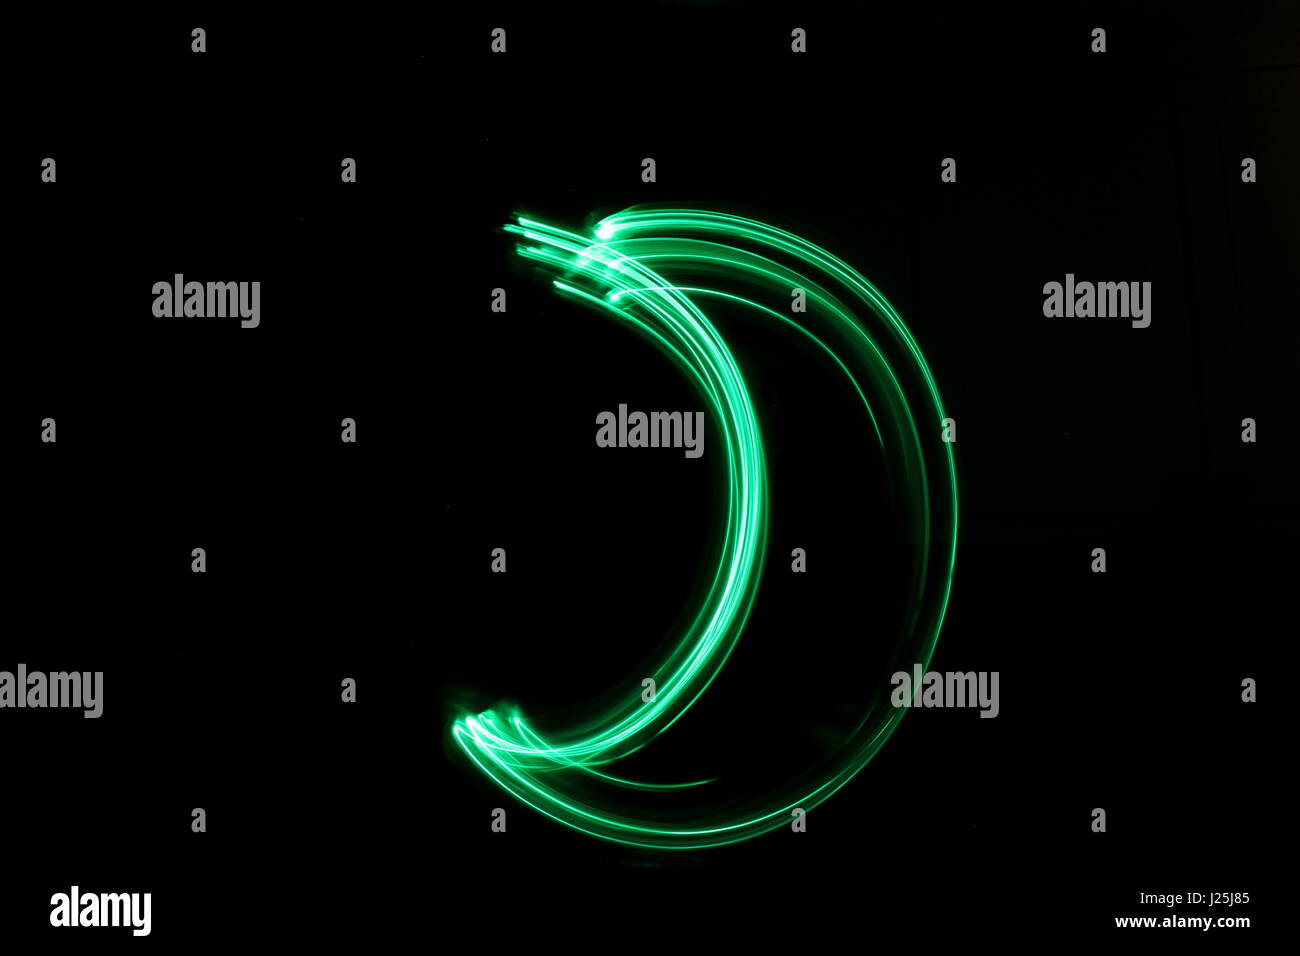 Long exposure photograph of neon green colour in an abstract moon shape against a black background. Light painting photography, abstract colour Stock Photo